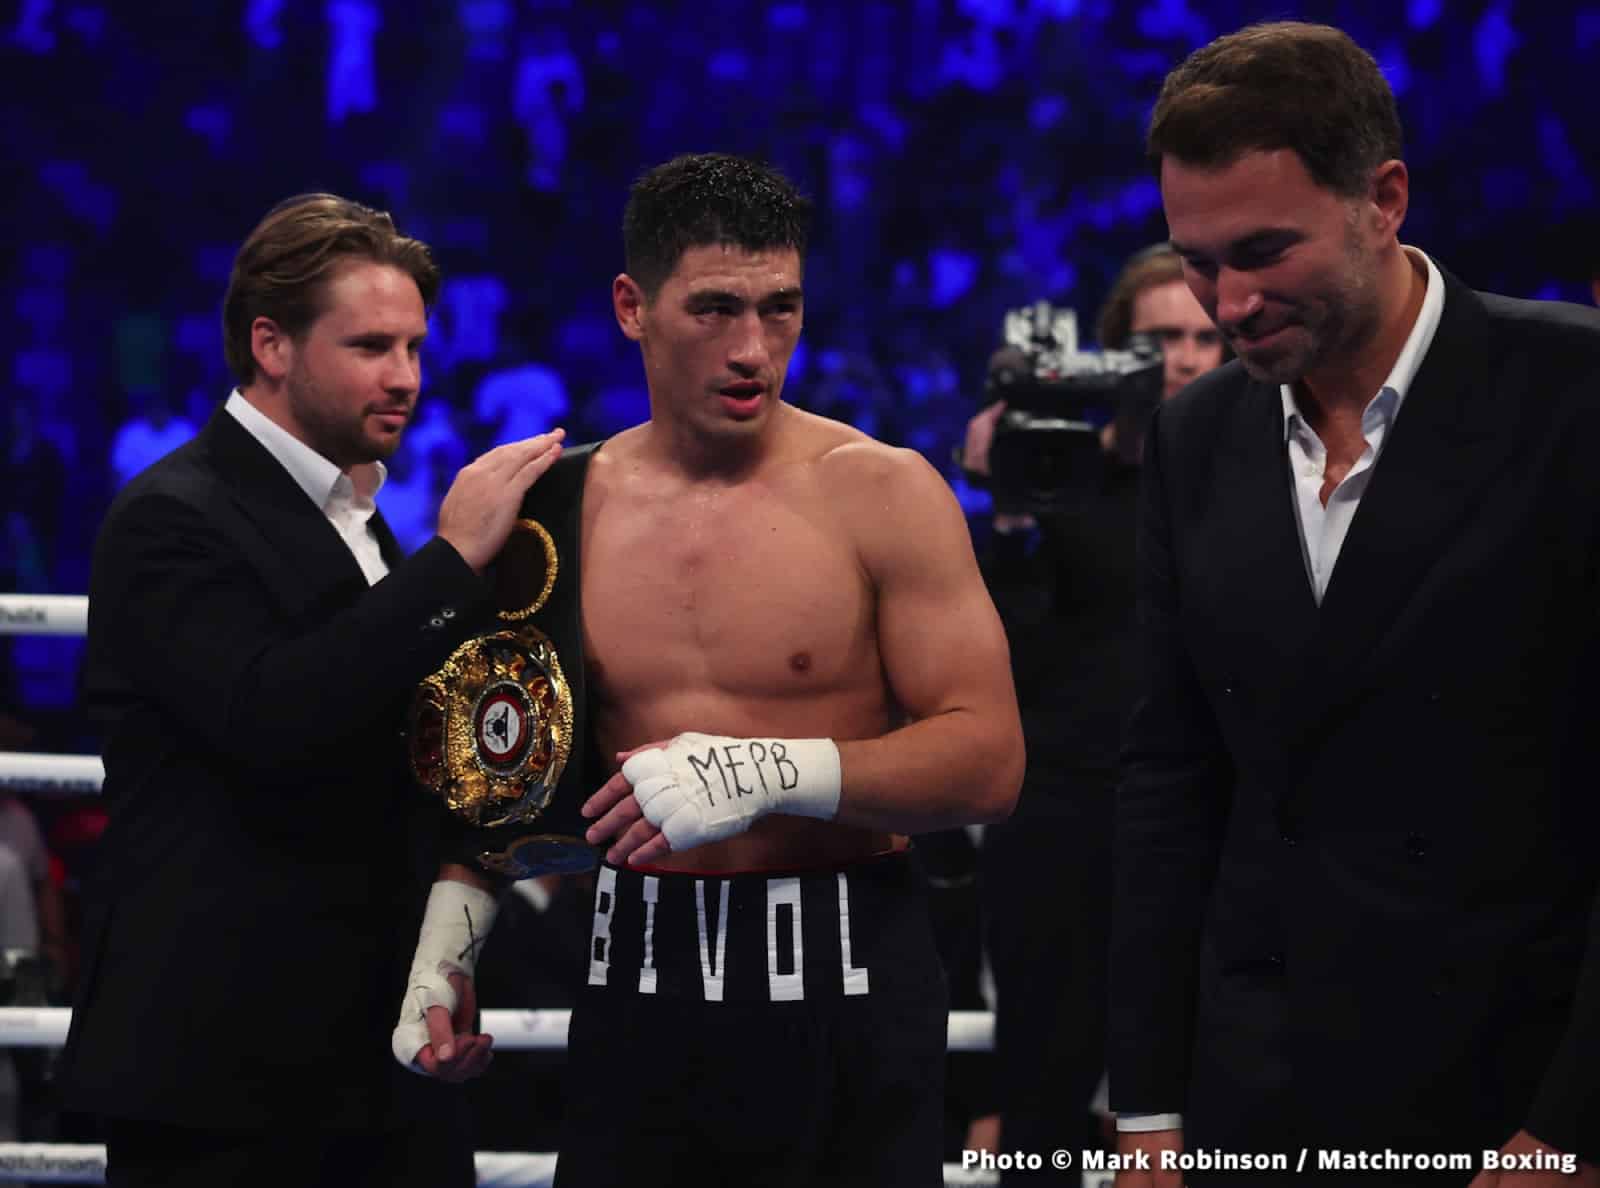 Dmitry Bivol Could Fight Canelo For Undisputed At 168, Then Beterbiev At 175